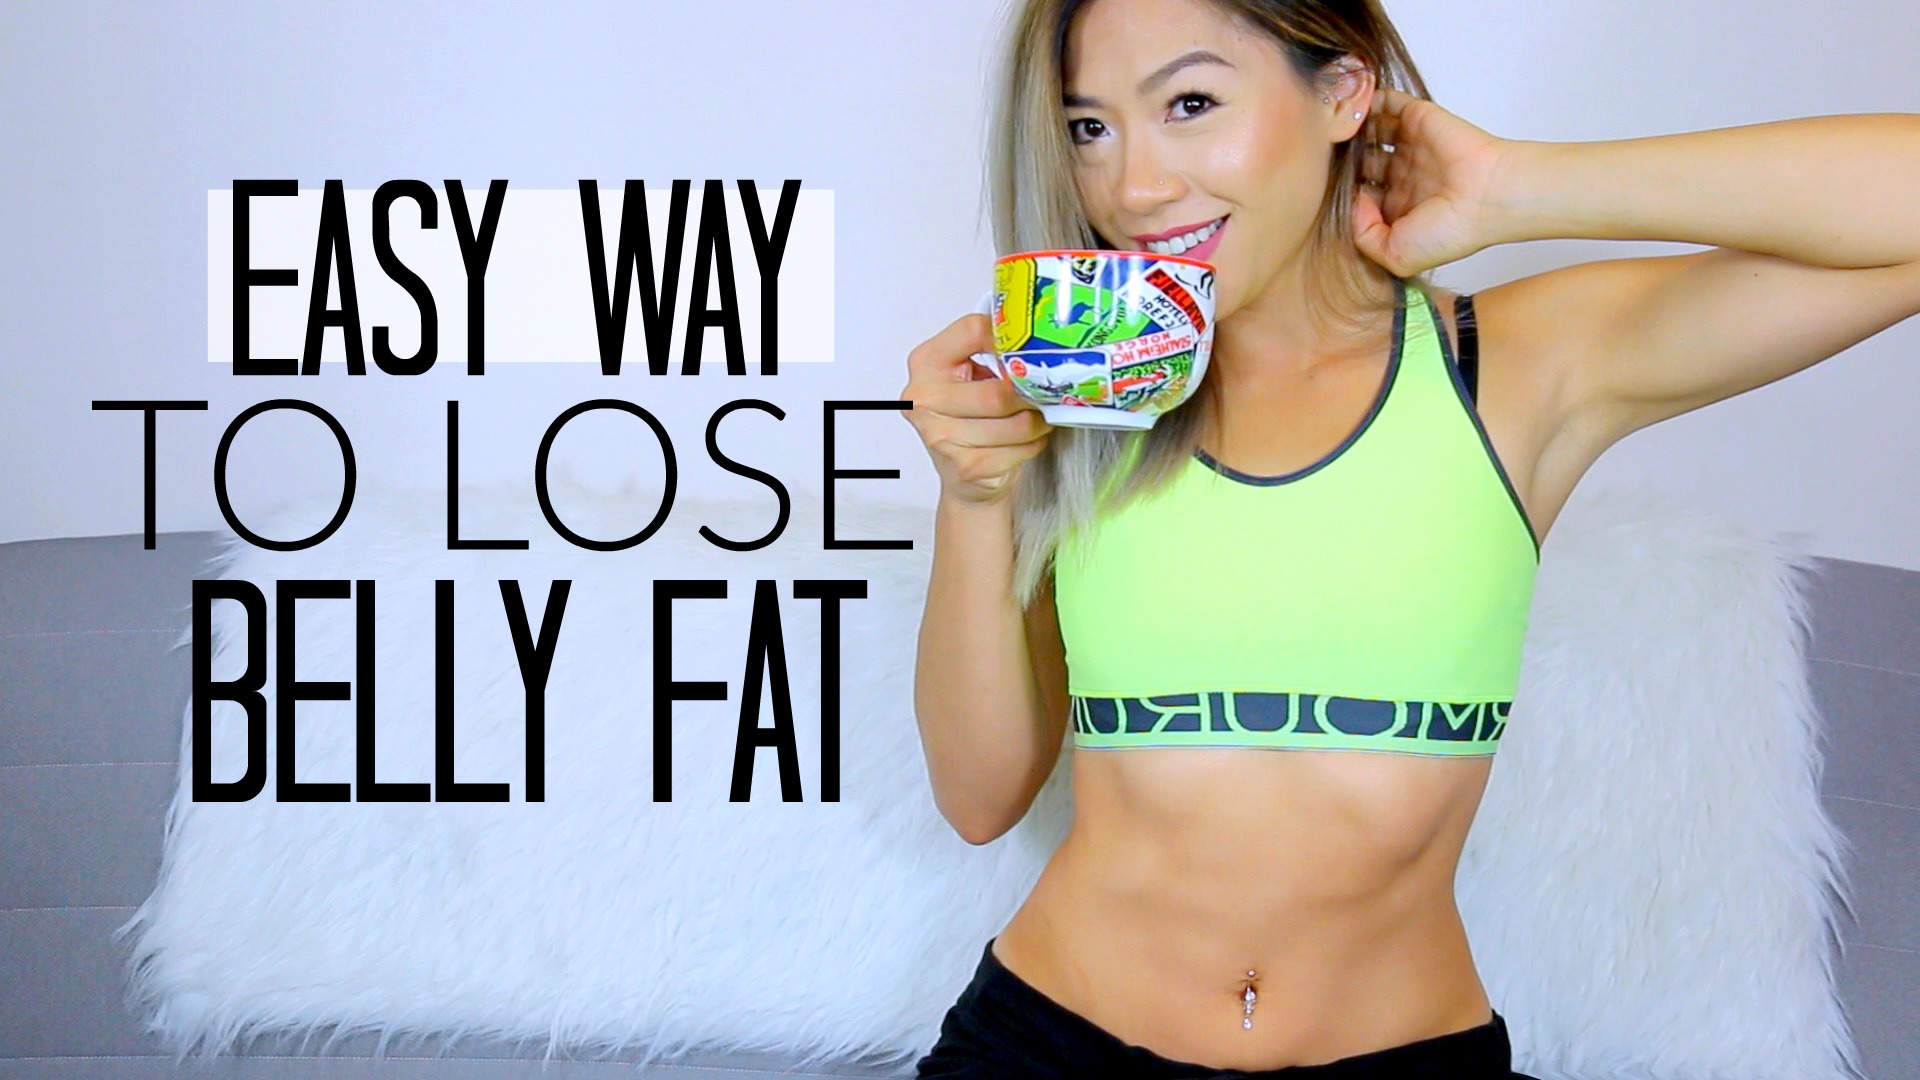 DRINK THIS TO LOSE WEIGHT & BURN BELLY FAT!